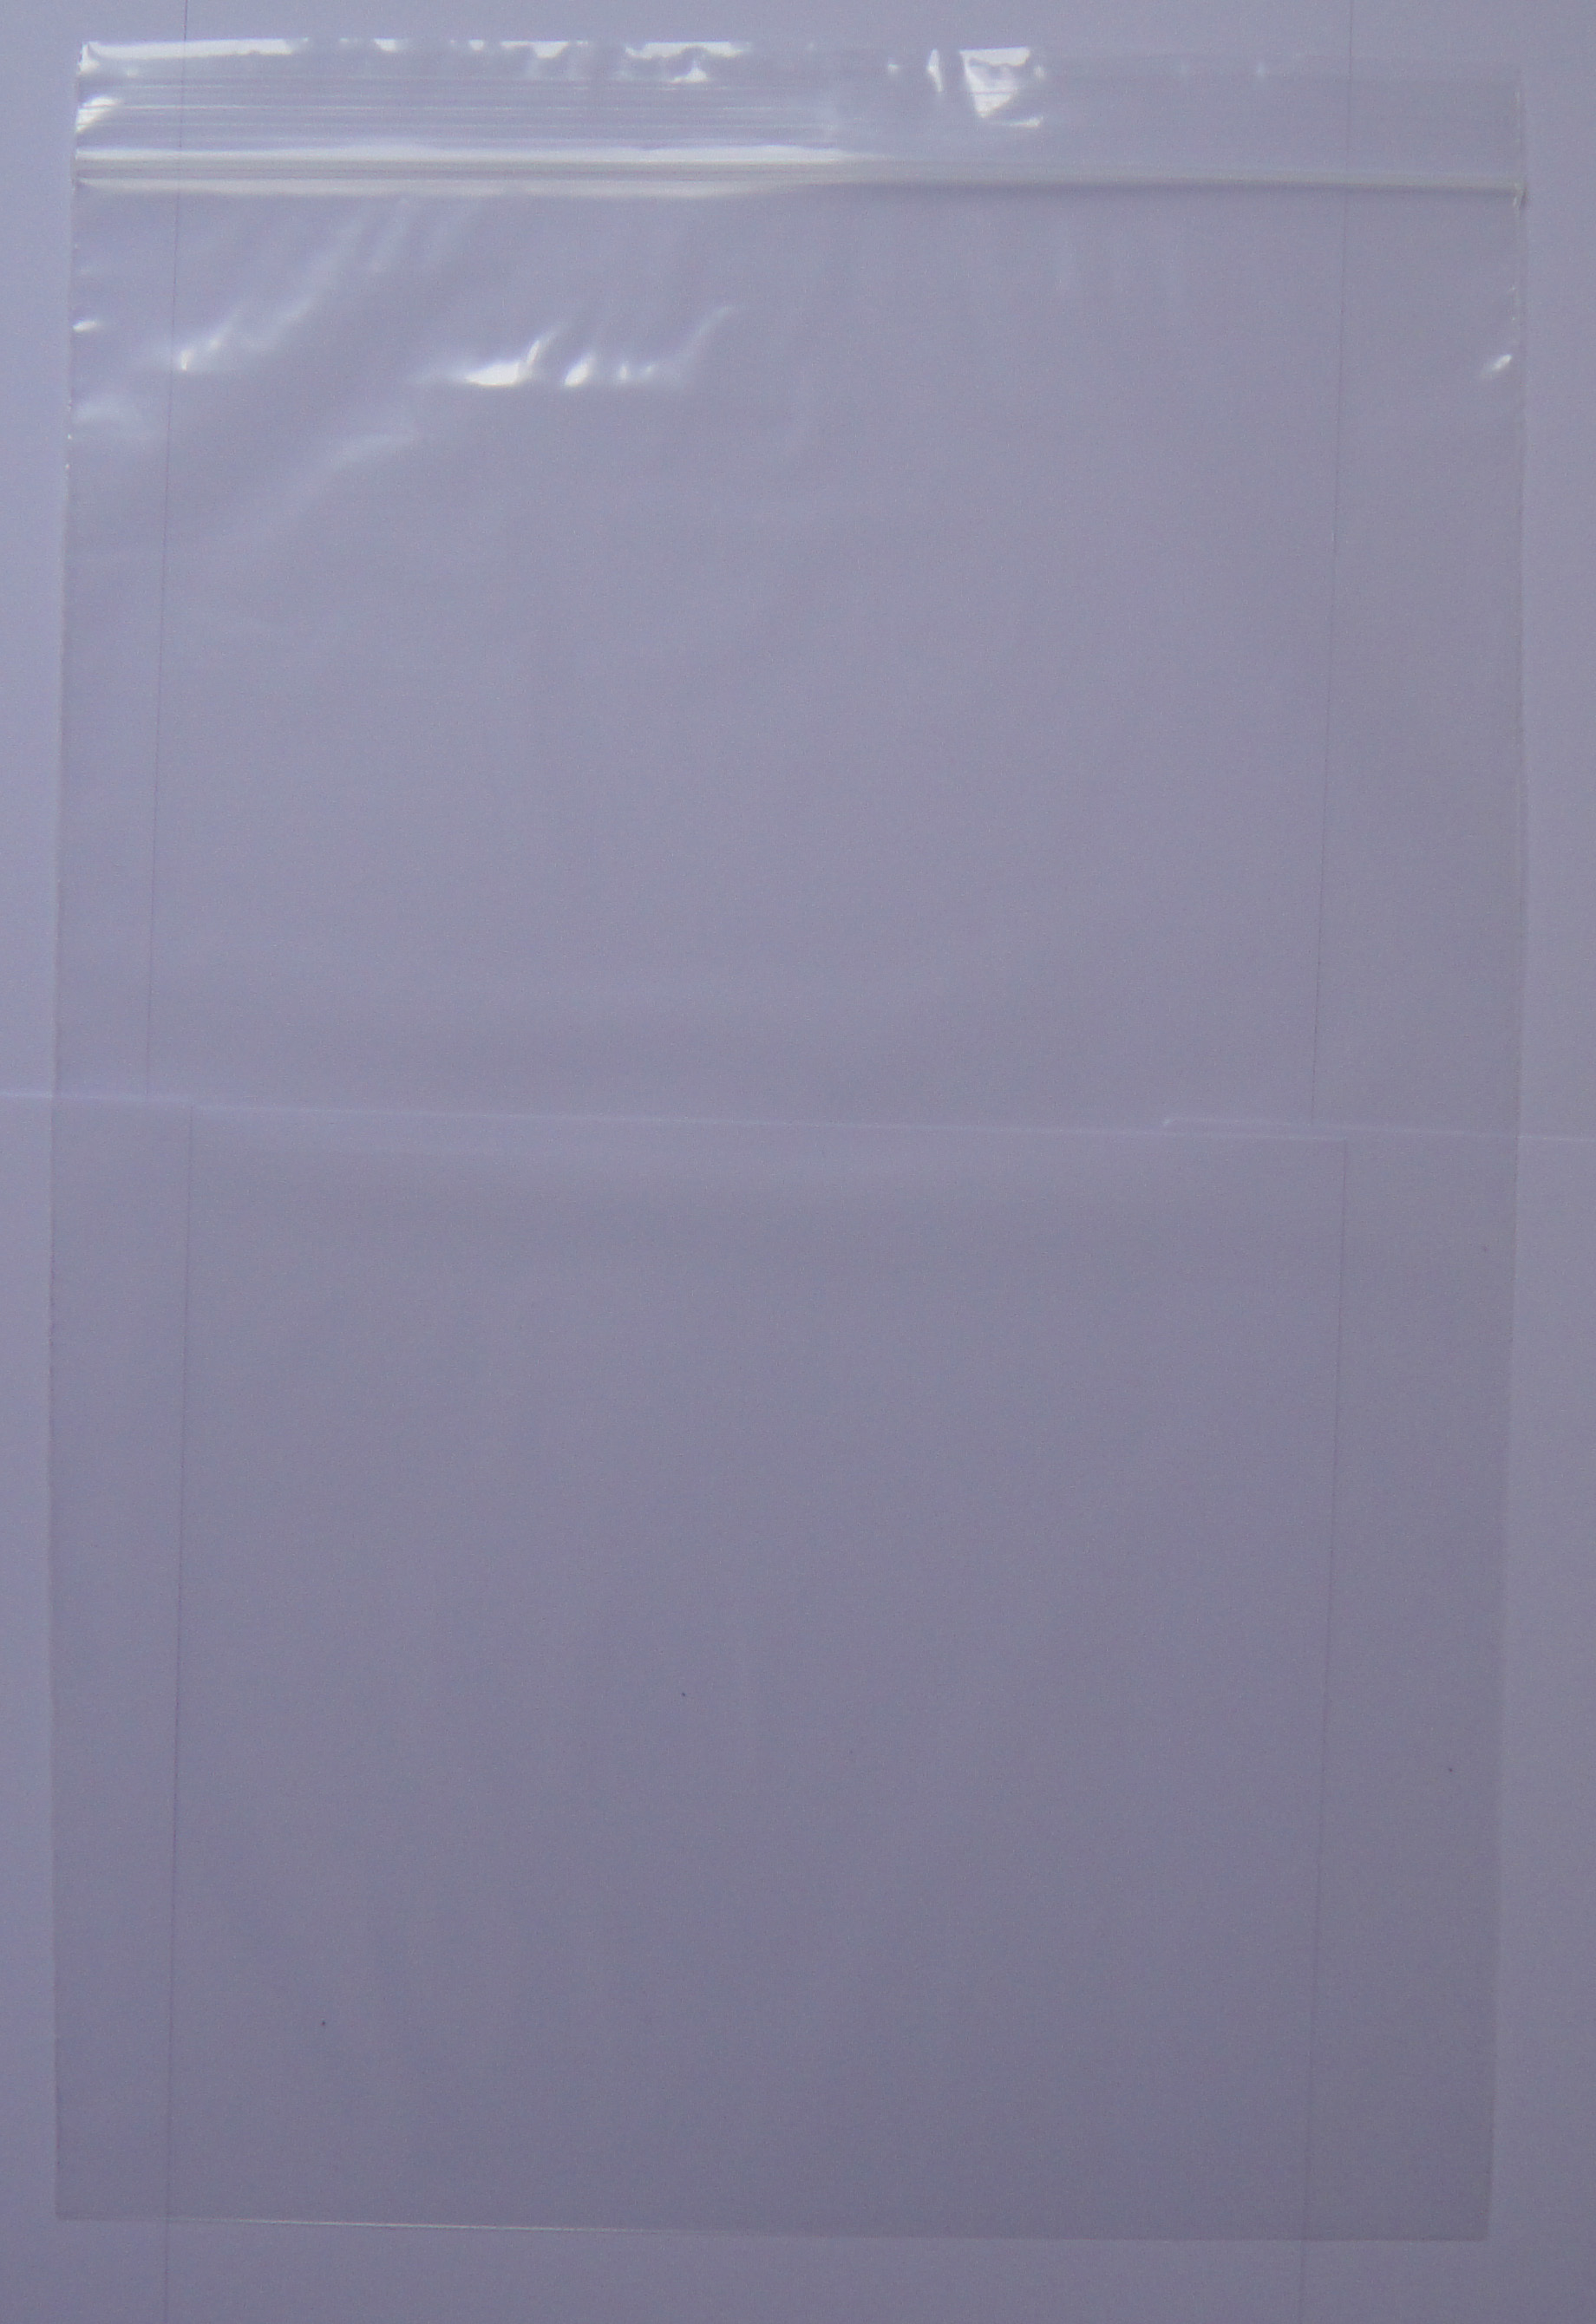 ALL SIZES ++ GRIP SEAL RESEALABLE BAGS CLEAR PLAIN POLYTHENE PREMIUM QUALITY++ 